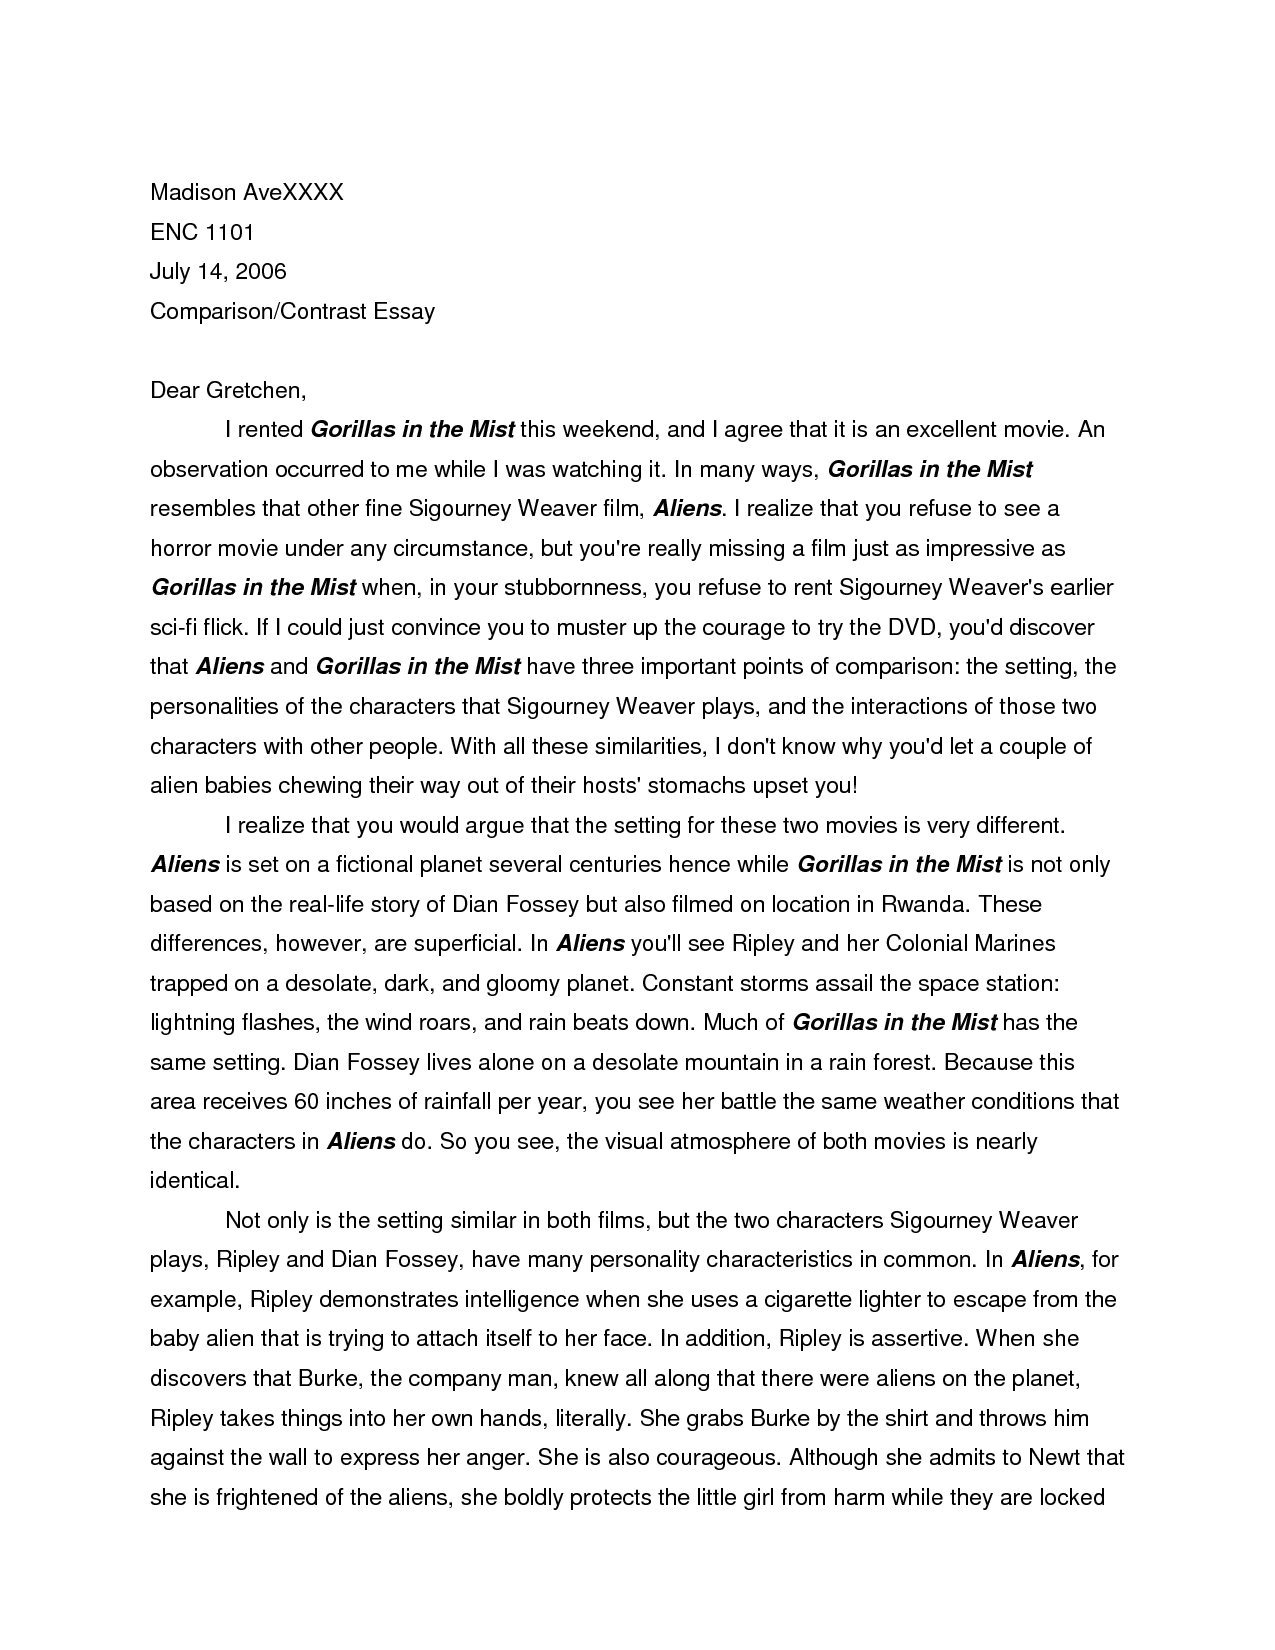 how to write a compare and contrast essay research